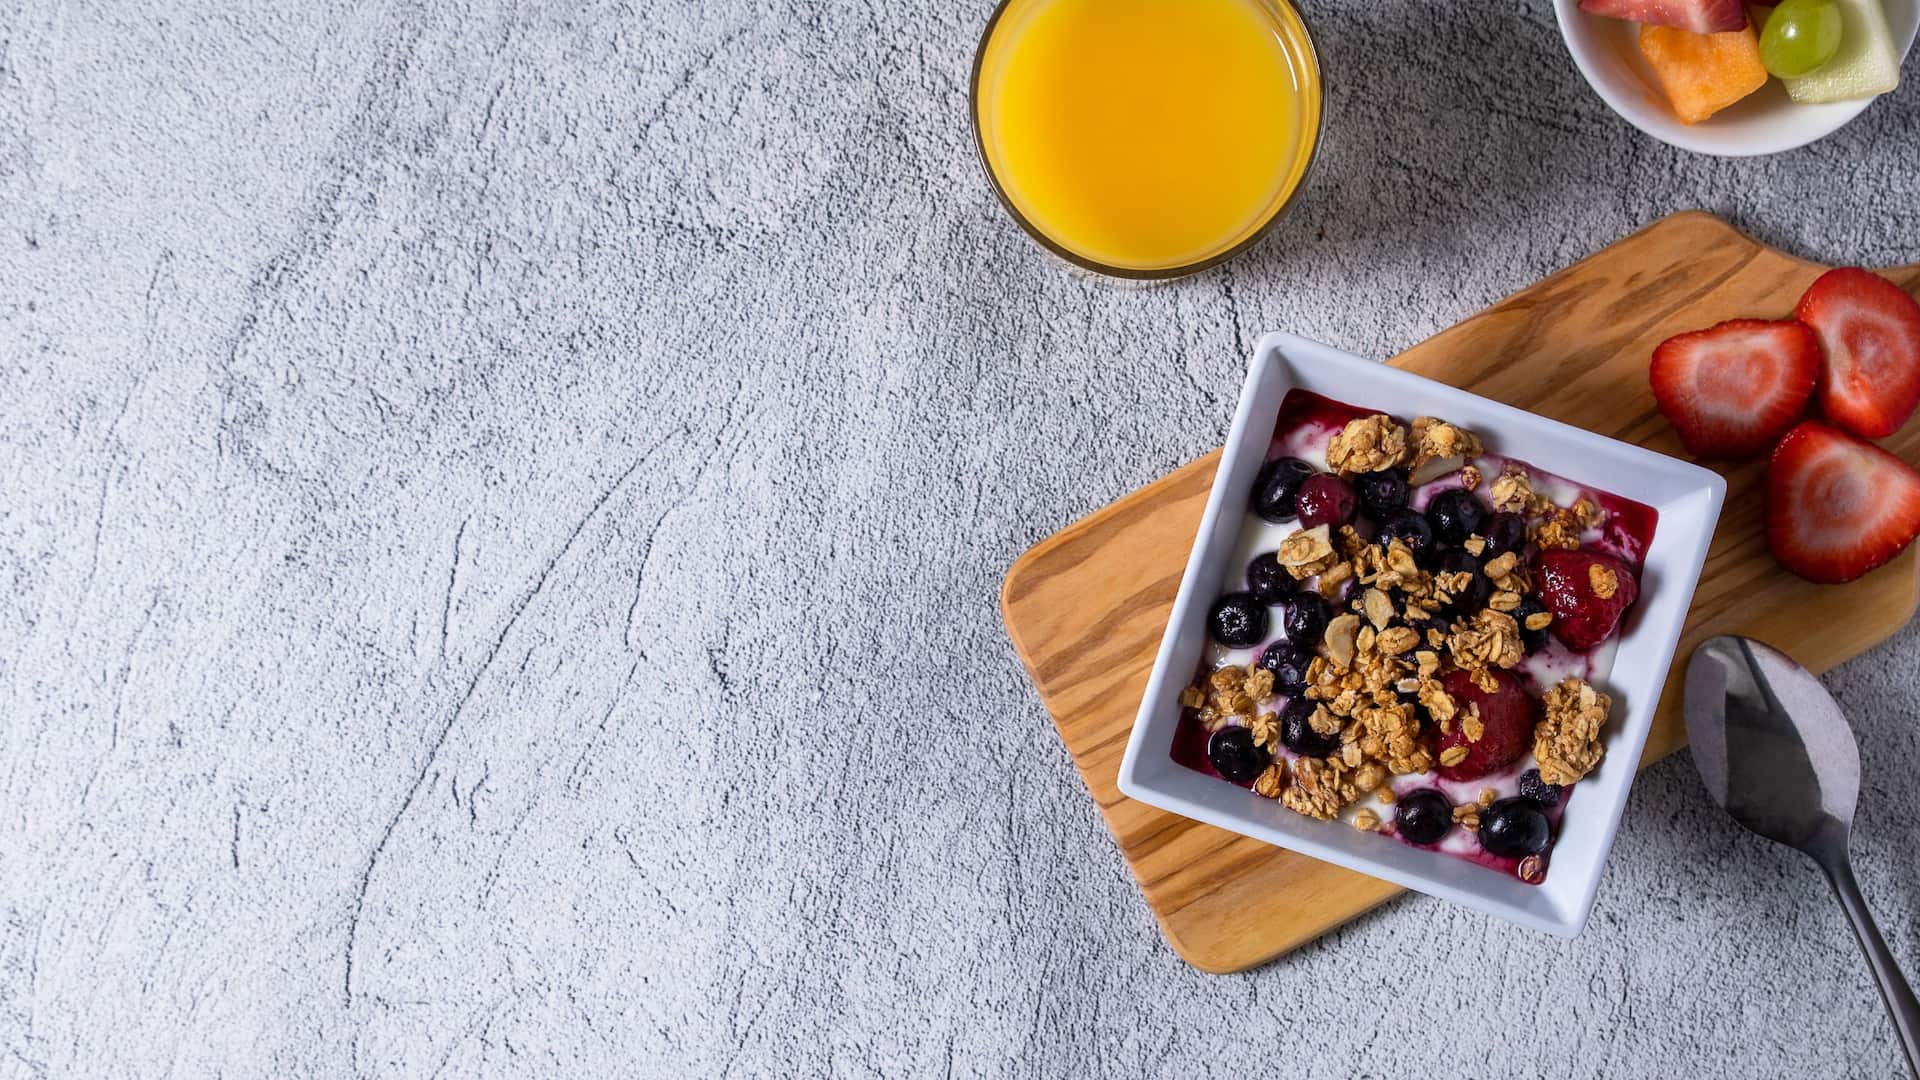 Granola and fruit spread